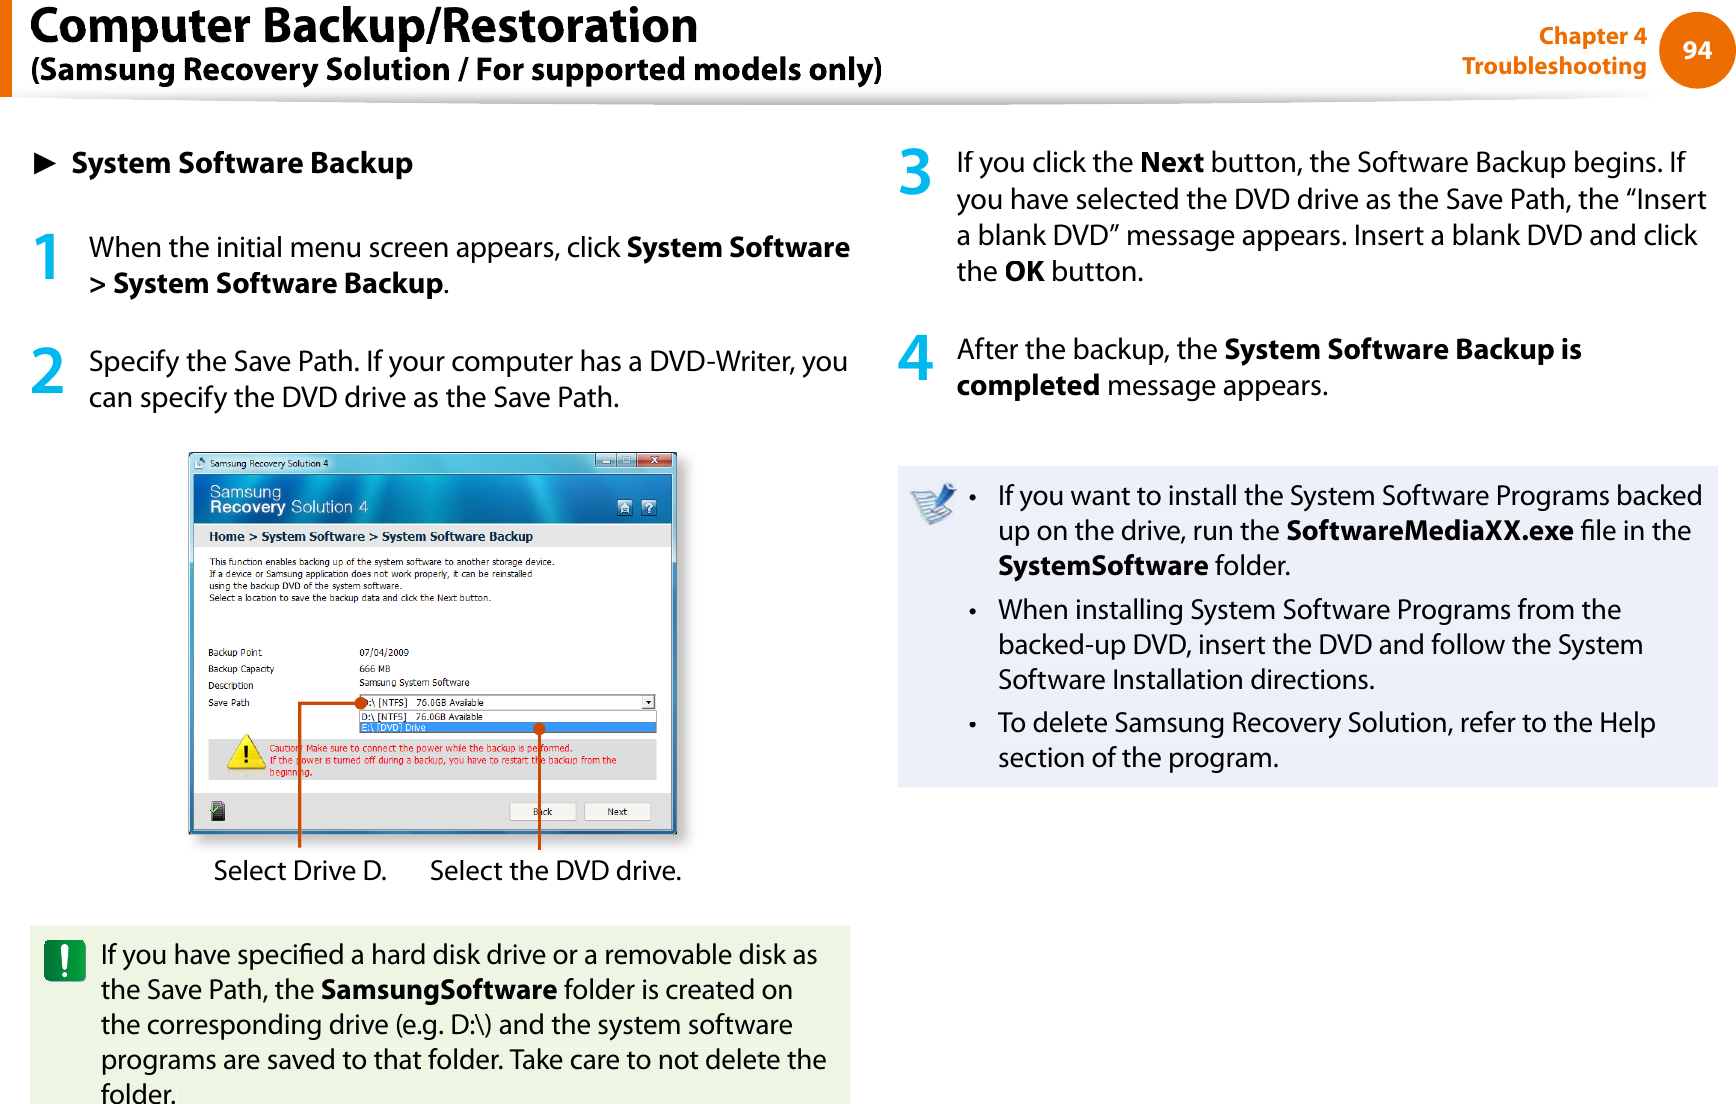 94Chapter 4TroubleshootingŹSystem Software Backup1When the initial menu screen appears, click System Software&gt; System Software Backup.2Specify the Save Path. If your computer has a DVD-Writer, youcan specify the DVD drive as the Save Path.Select Drive D.Select the DVD drive.If you have specied a hard disk drive or a removable disk asthe Save Path, theSamsungSoftware folder is created onthe corresponding drive (e.g. D:\) and the system softwareprograms are saved to that folder. Take care to not delete thefolder.3If you click theNext button, the Software Backup begins. If you have selected the DVD drive as the Save Path, the “Inserta blank DVD” message appears. Insert a blank DVD and click theOK button.K4After the backup, the System Software Backup iscompleted message appears.If you want to install the System Software Programs backedtup on the drive, run theSoftwareMediaXX.exe le in theSystemSoftware folder.When installing System Software Programs from thetbacked-up DVD, insert the DVD and follow the SystemSoftware Installation directions.To delete Samsung Recovery Solution, refer to the Helptsection of the program.Computer Backup/Restoration